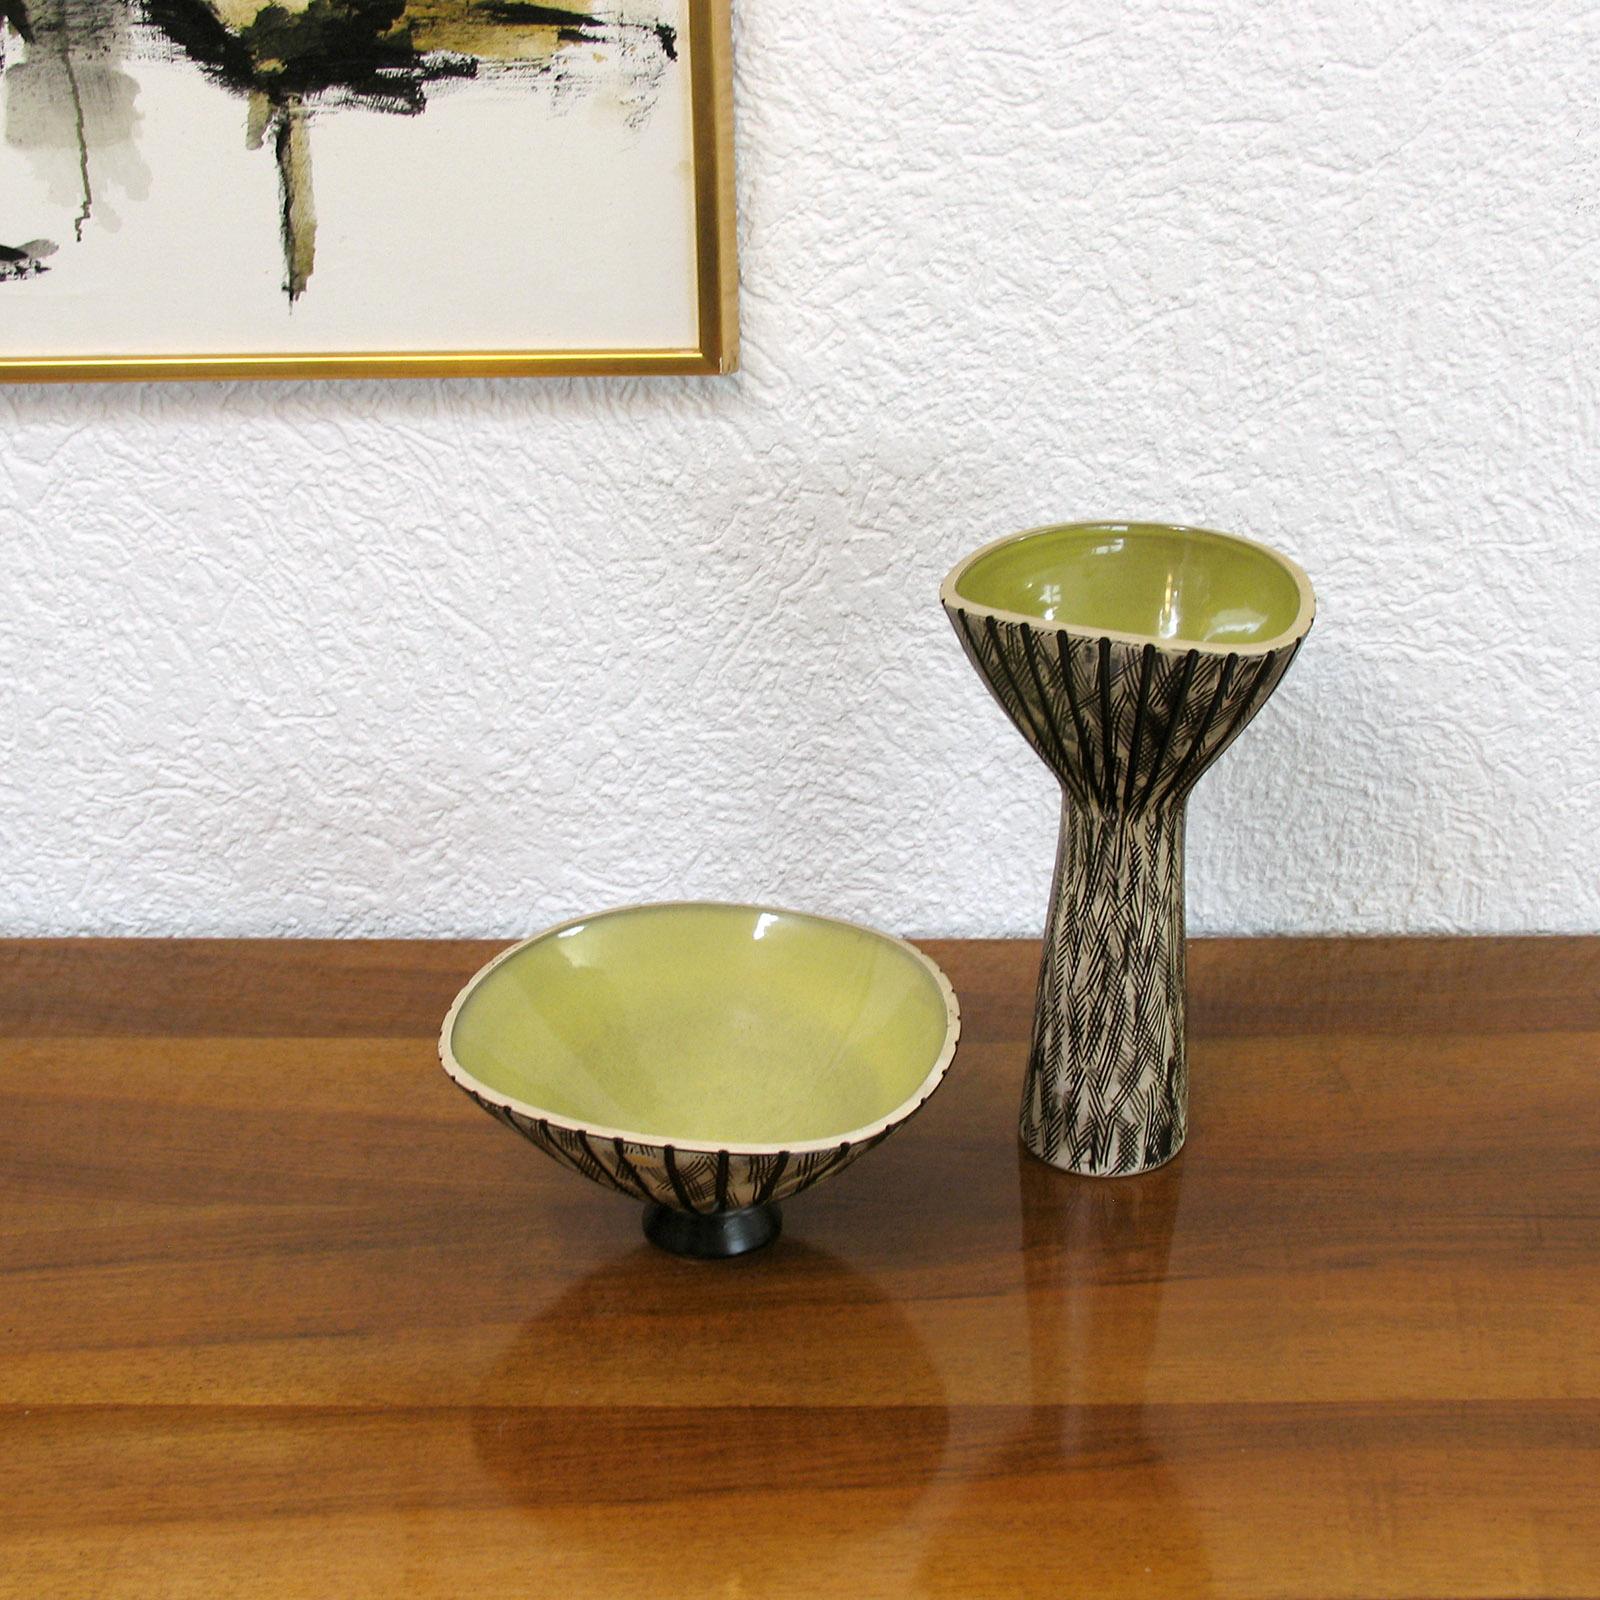 Rare mid-century ceramic vessels by Mari Simulsson for Upsala Ekeby Sweden 1950s
Gorgeous Upsala Ekeby ceramic vase and bowl, triangularly shaped, outer finished in beige and black earthenware nuances, with an organic stylized pattern, inner in